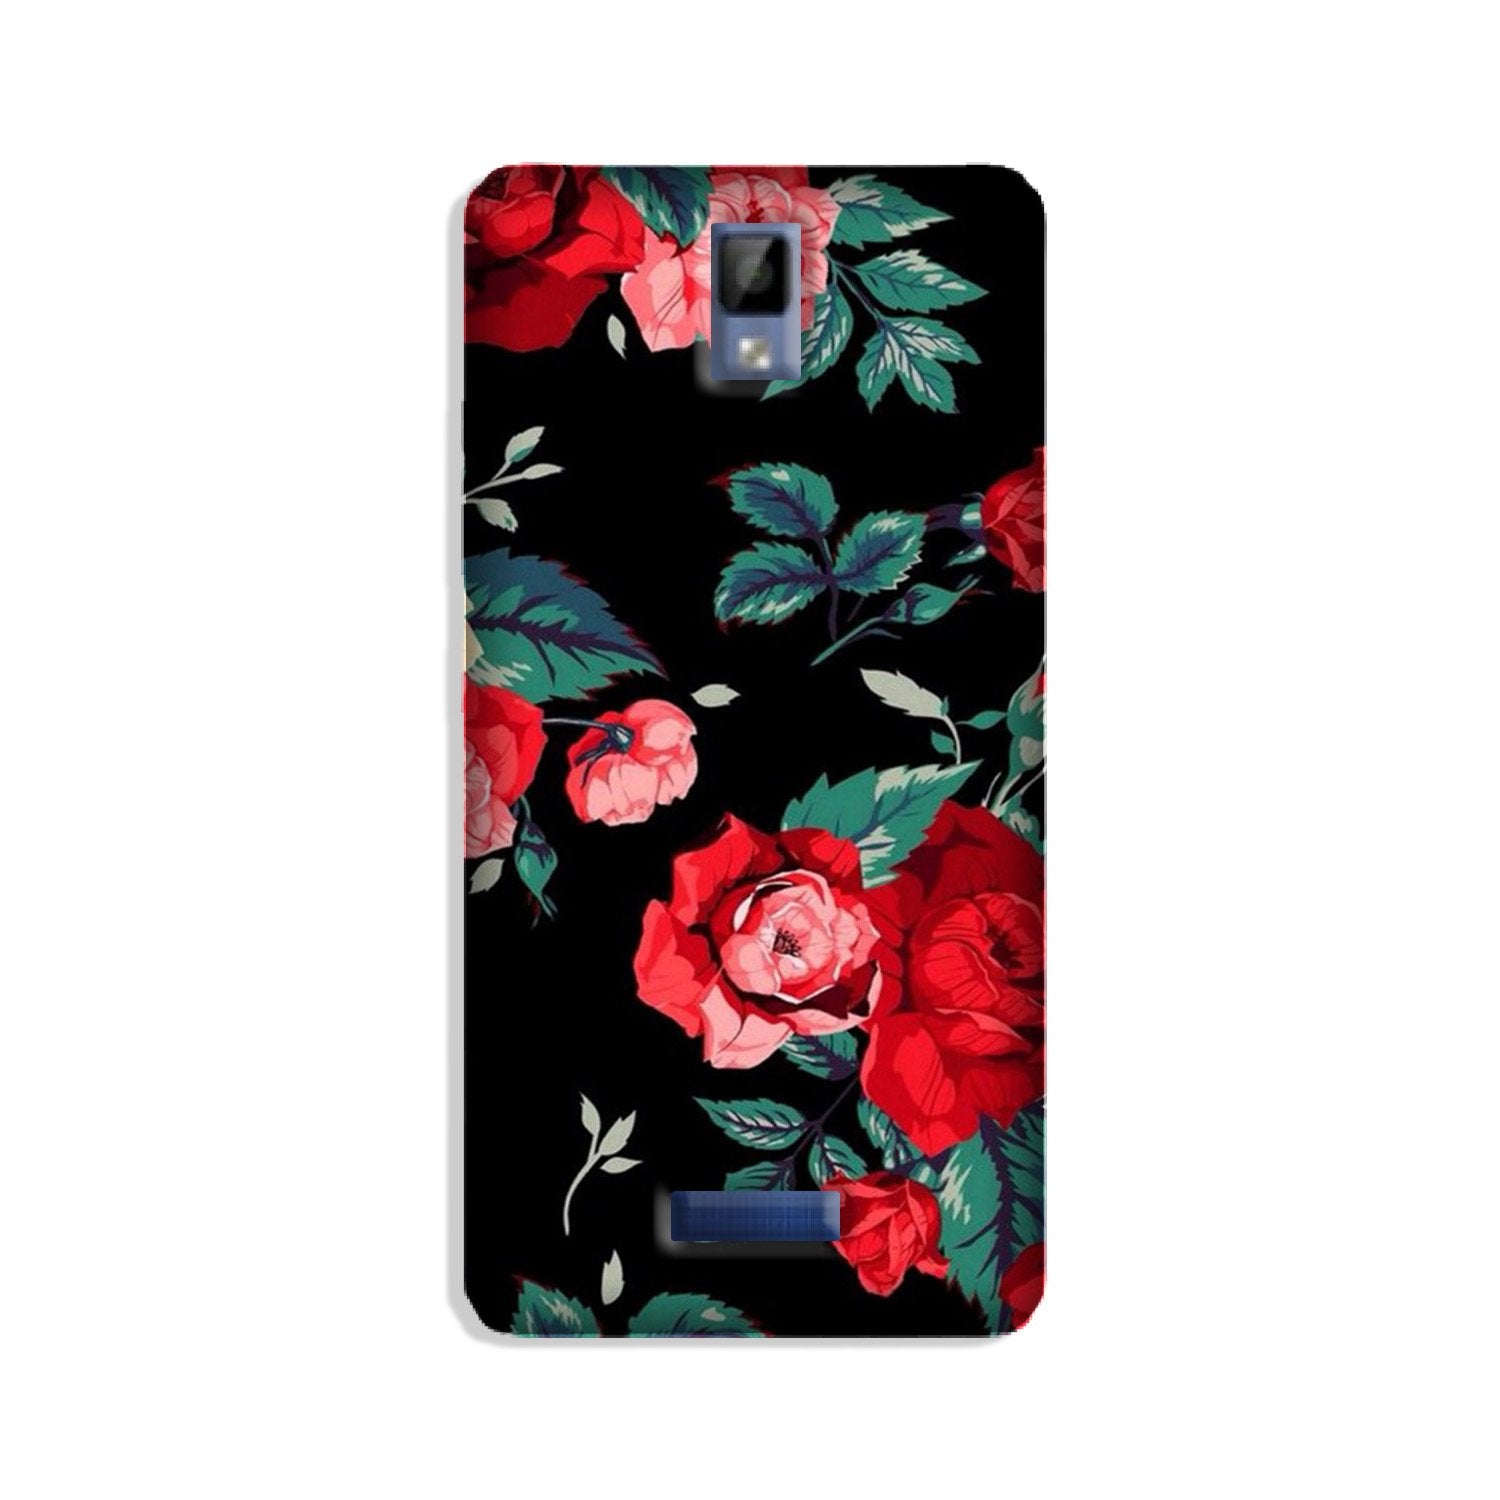 Red Rose2 Case for Gionee P7